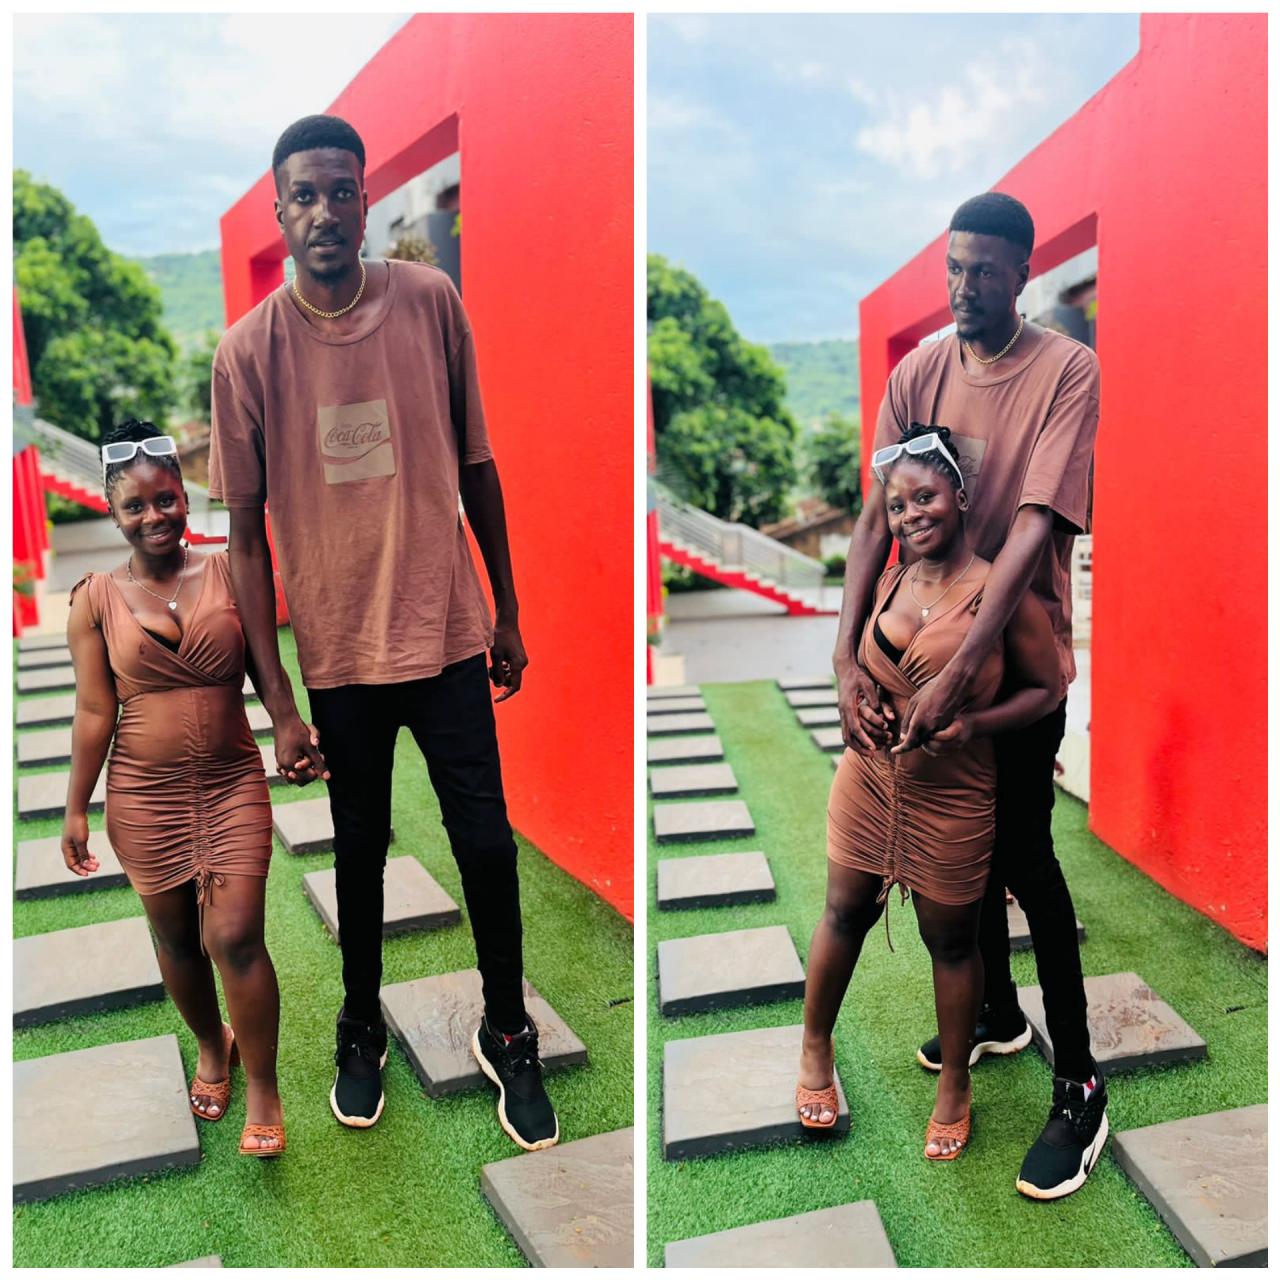 "Tallest man in South Africa" and his petite girlfriend celebrate their love 